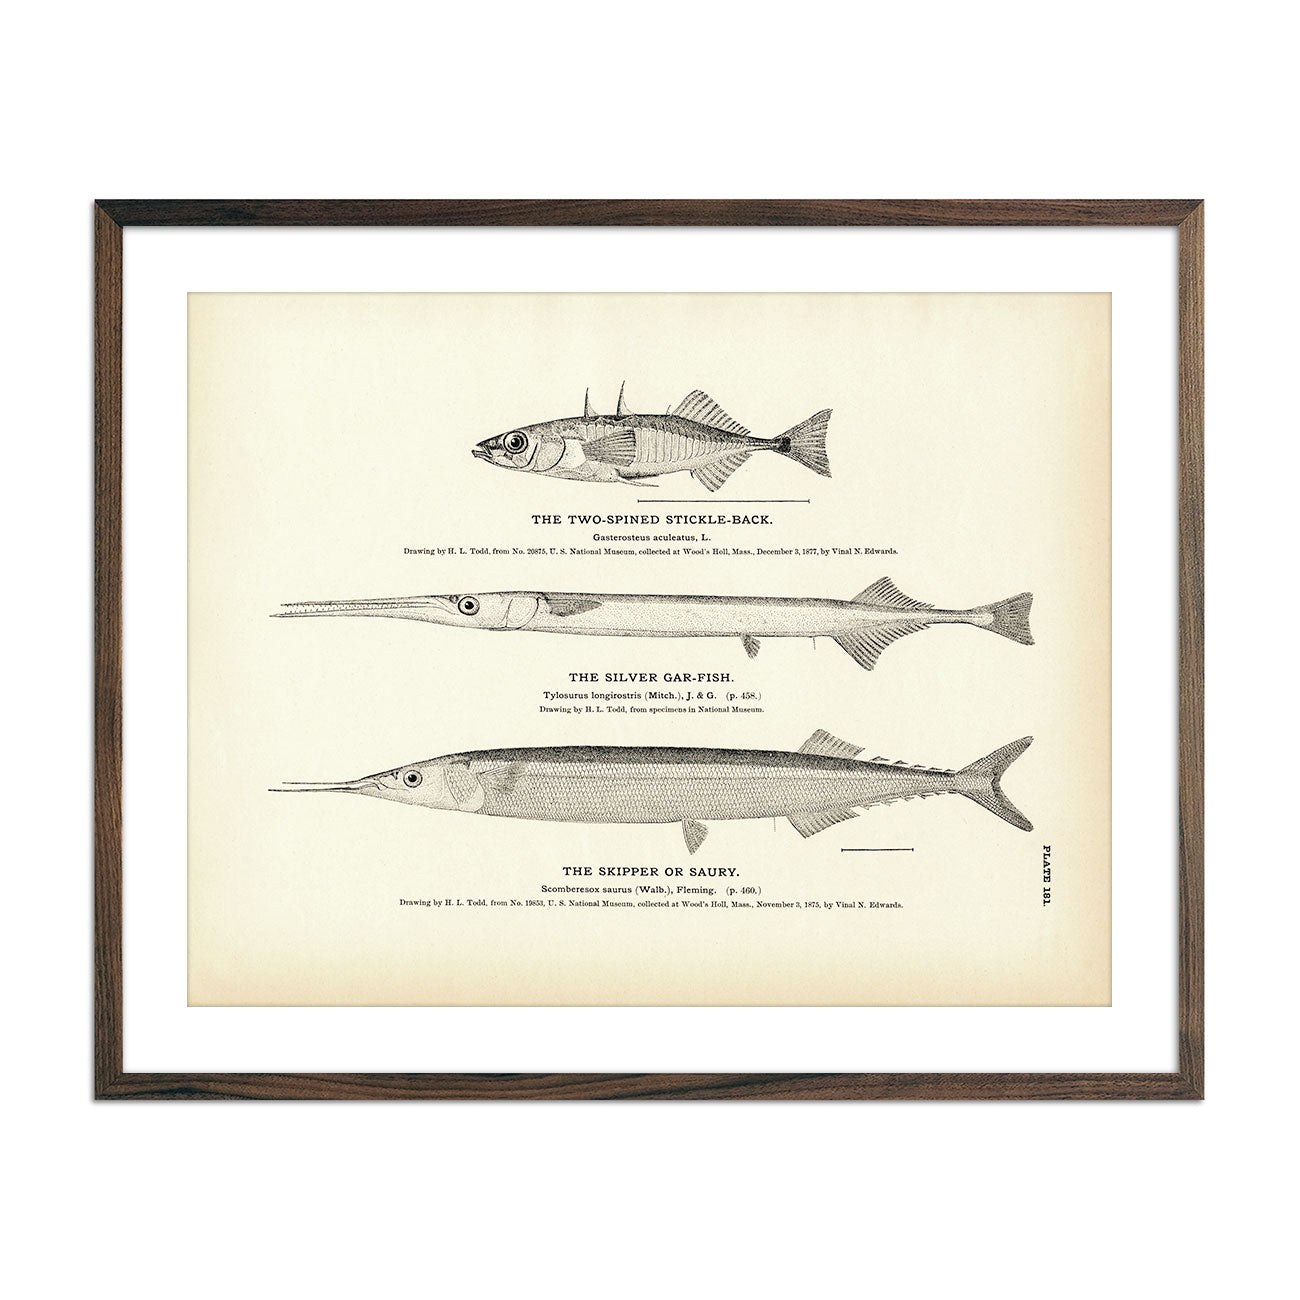 Vintage Two-Spined Stickle-Back, Silver Gar-Fish and Skipper fish print